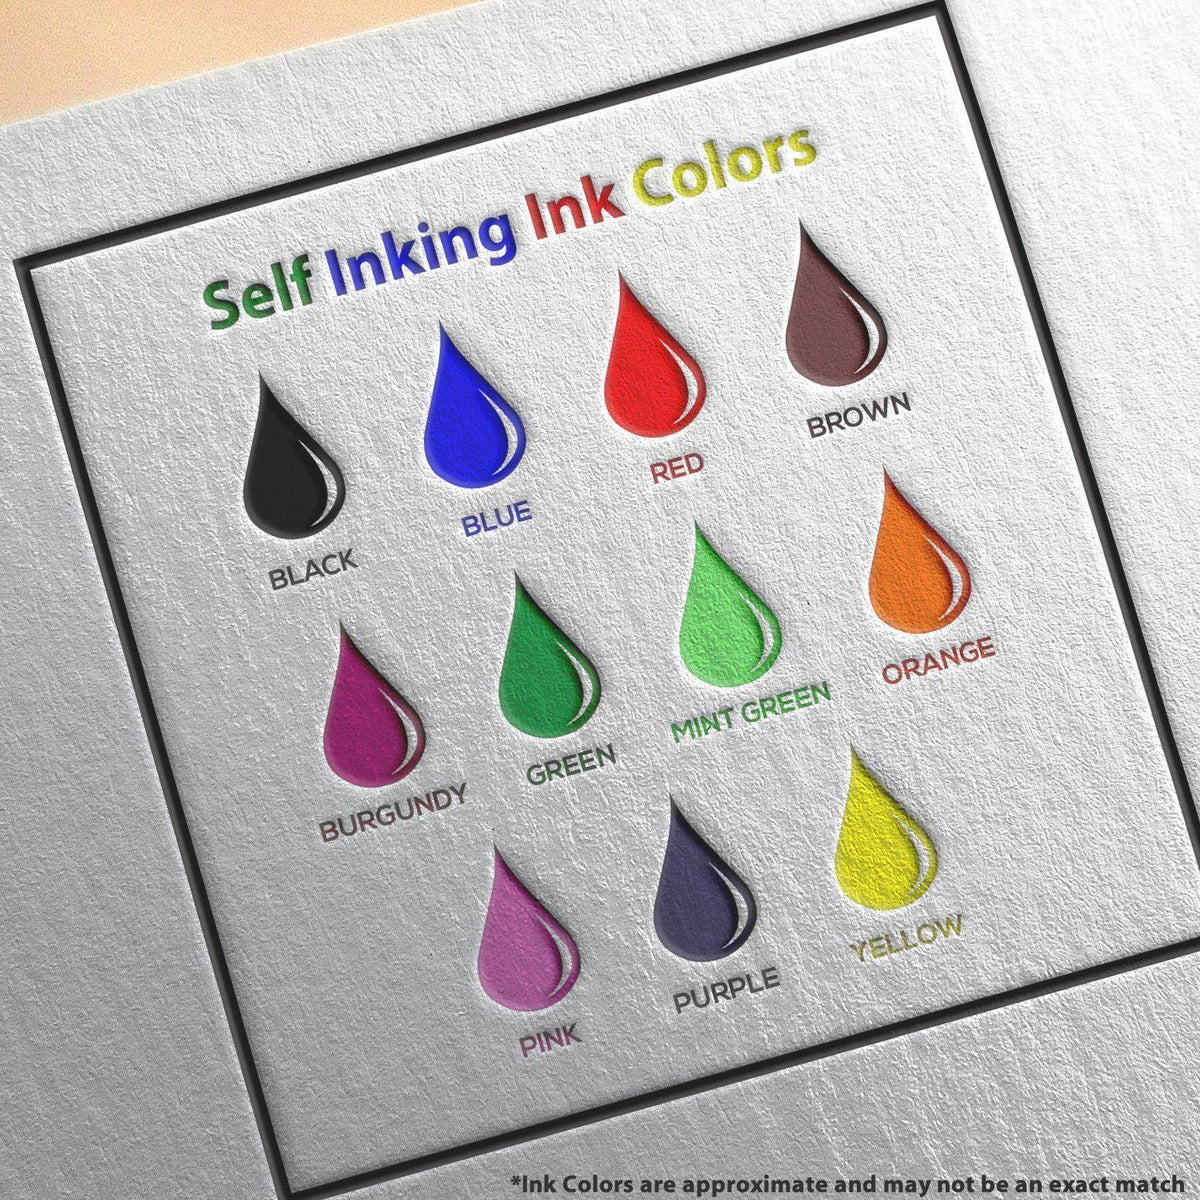 Self Inking Ink Colors Available